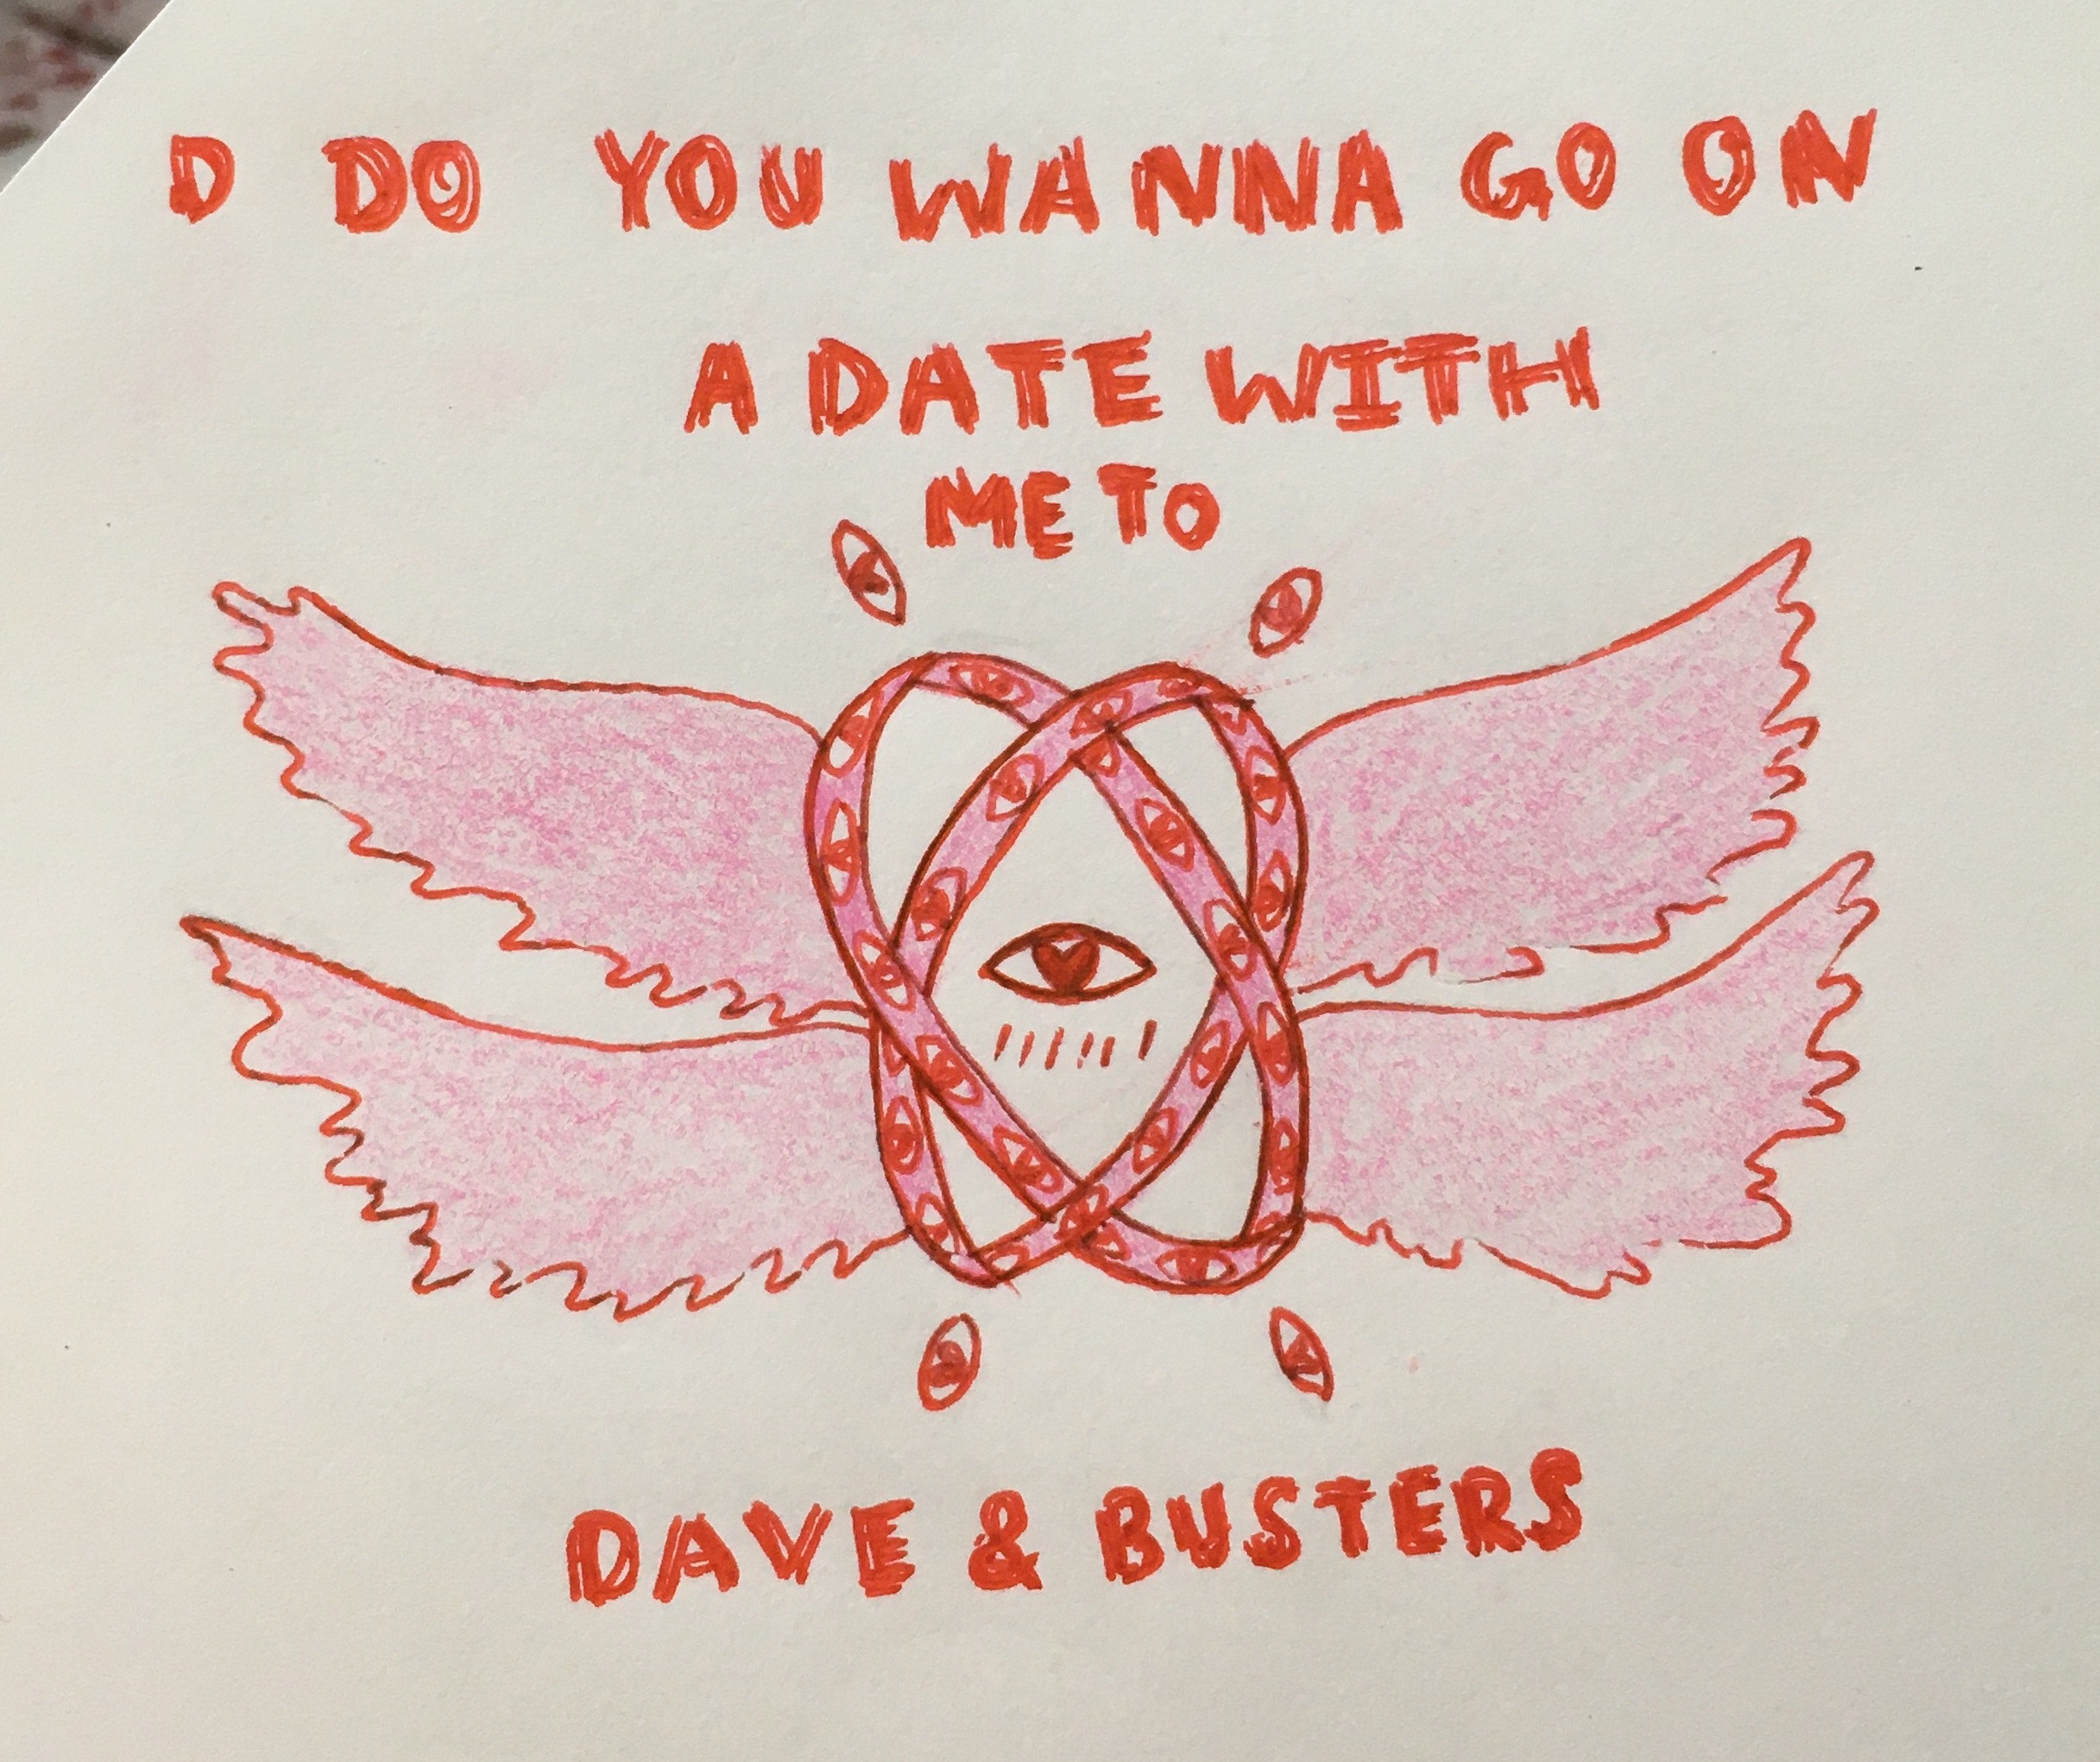 a pink and red drawing of a blushing biblically accurate angel with heart eyes and with text reading 'D DO YOU WANNA GO ON A DATE WITH ME TO DAVE & BUSTERS'